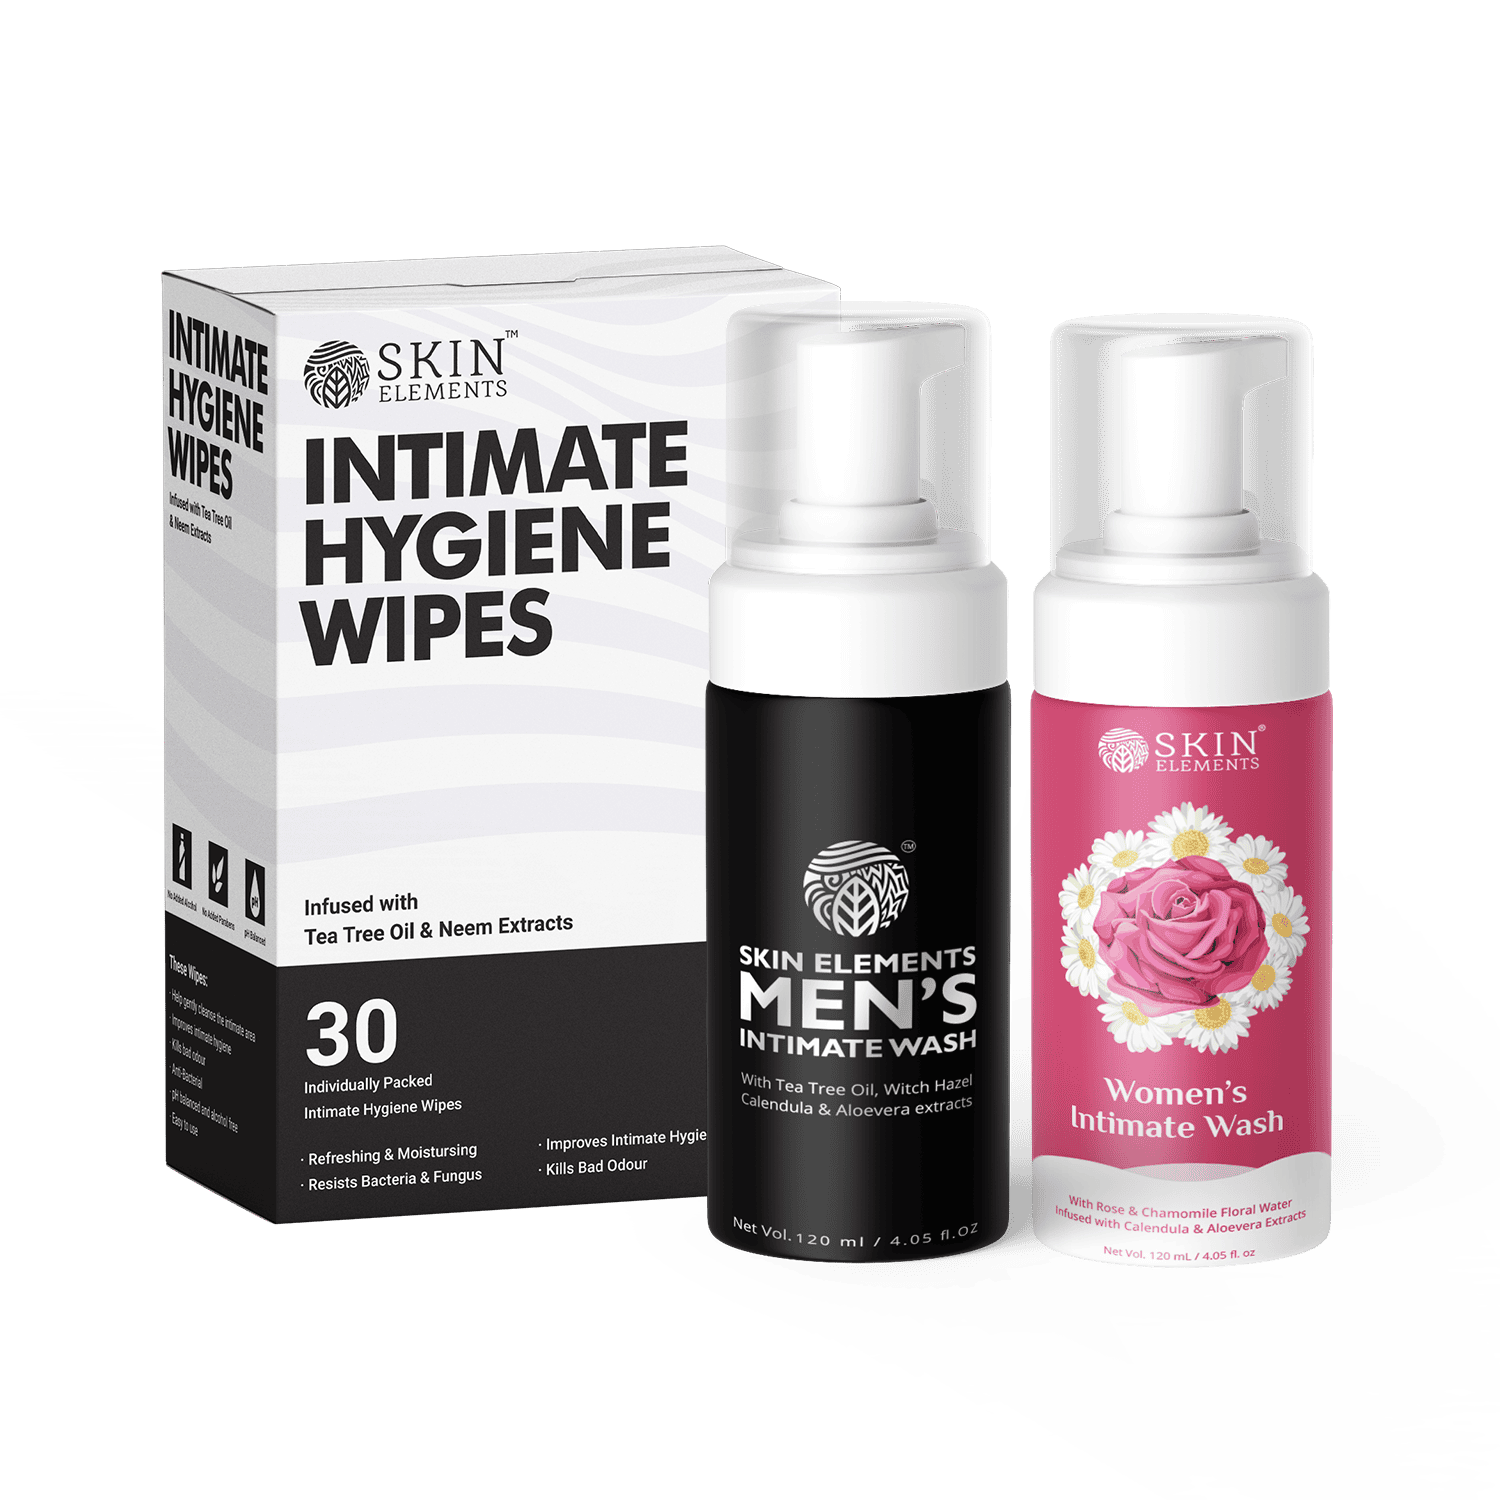 Intimate hygiene Wipes + Intimate wash for men & Women